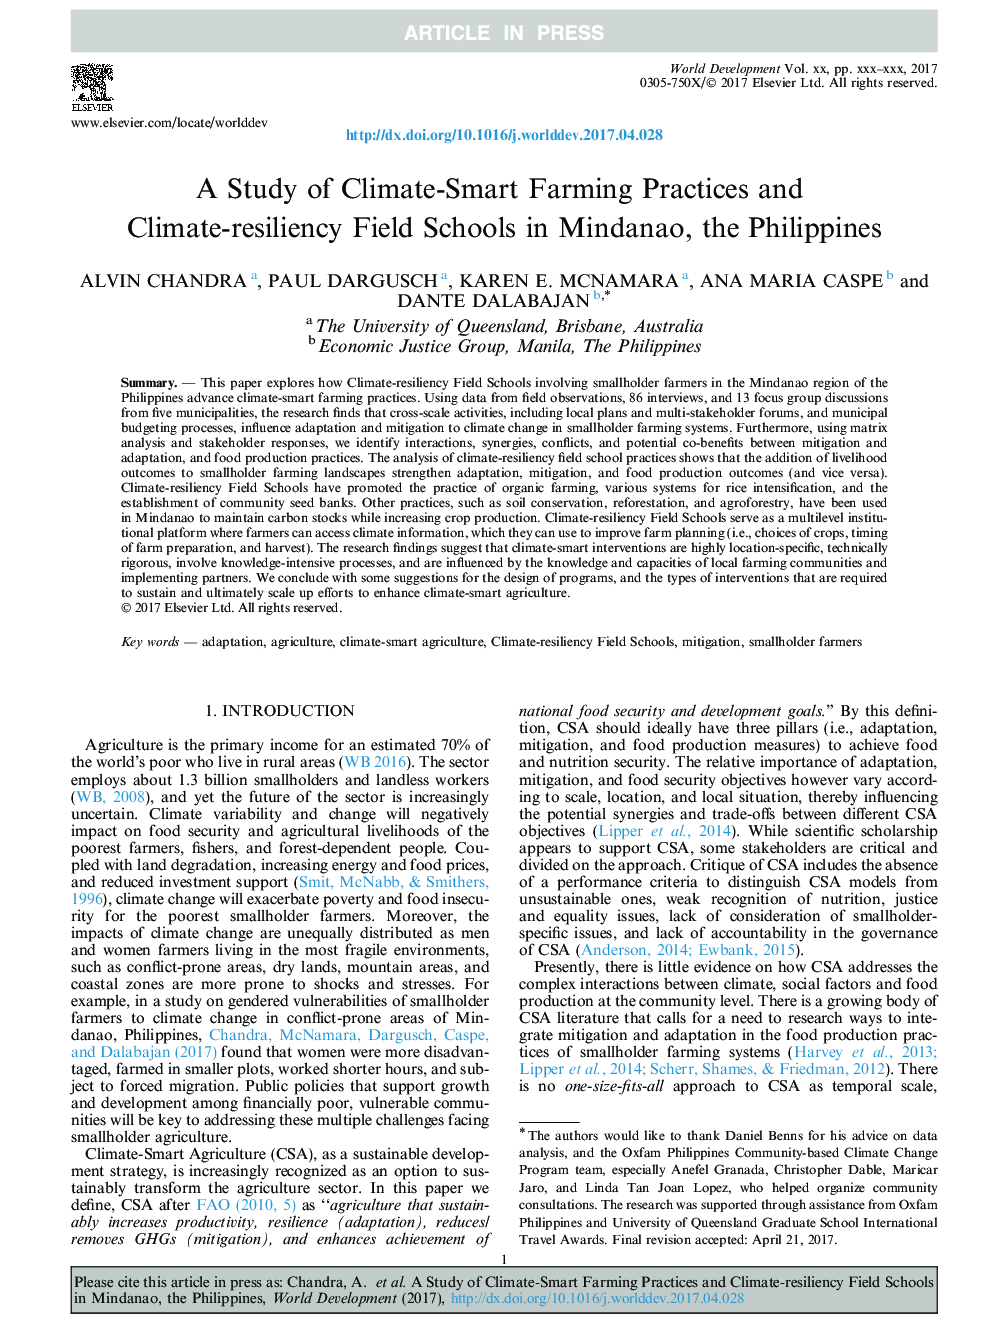 A Study of Climate-Smart Farming Practices and Climate-resiliency Field Schools in Mindanao, the Philippines